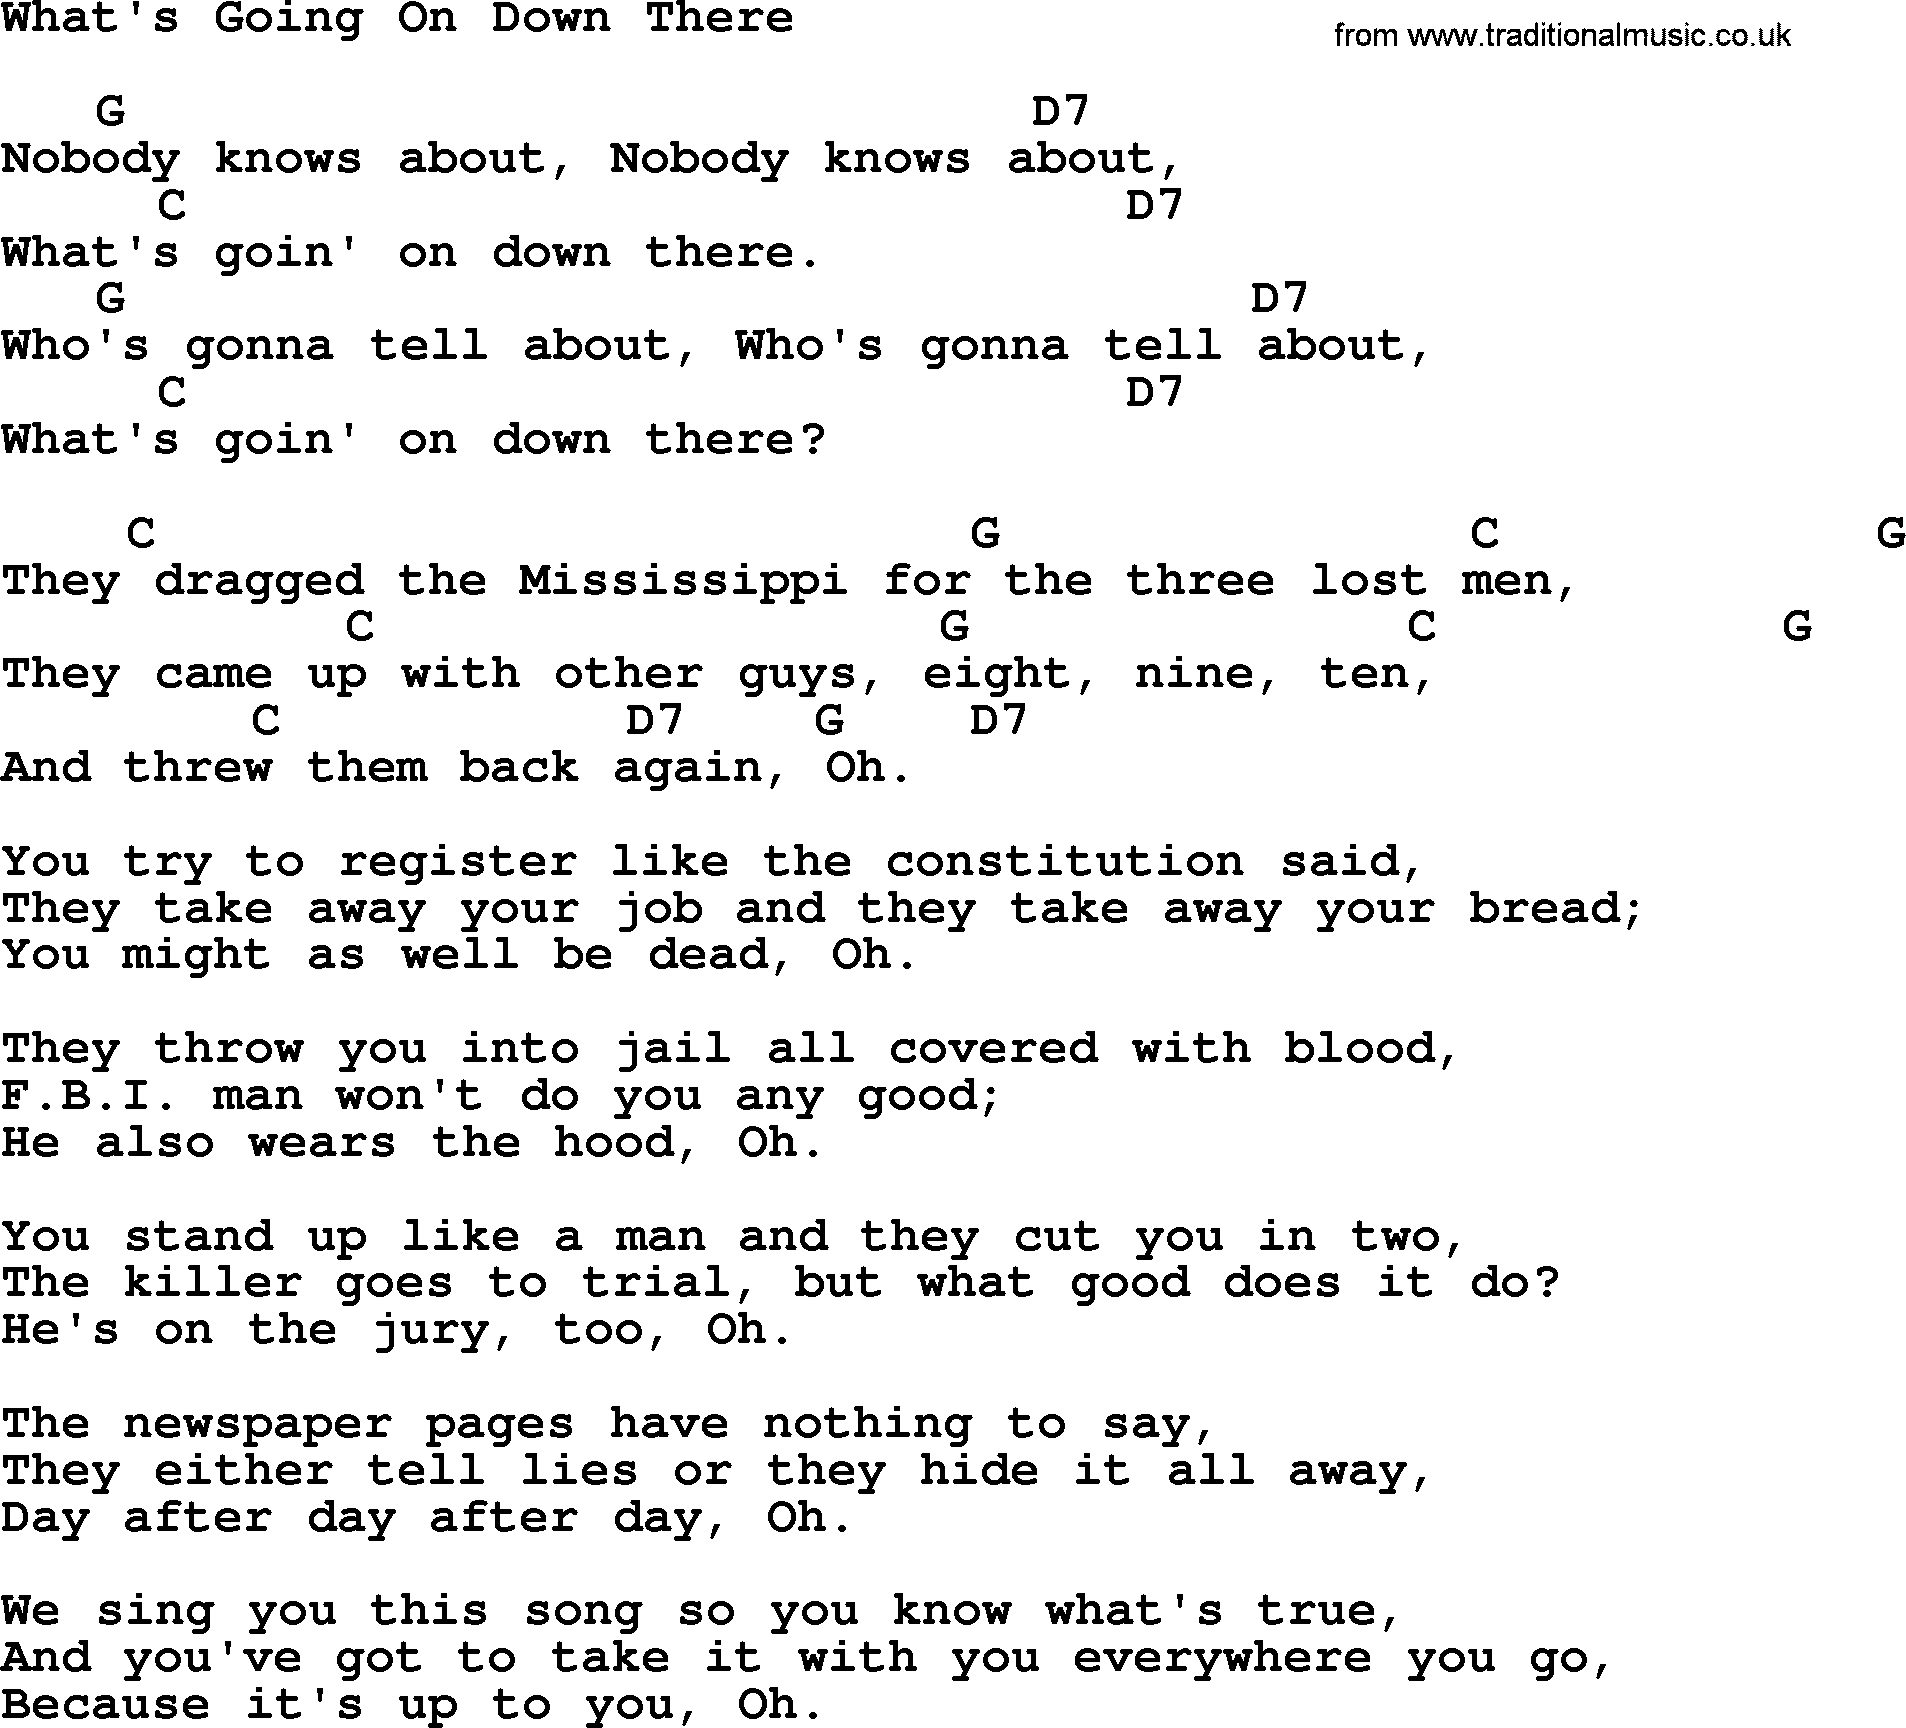 Pete Seeger song What's Going On Down There, lyrics and chords